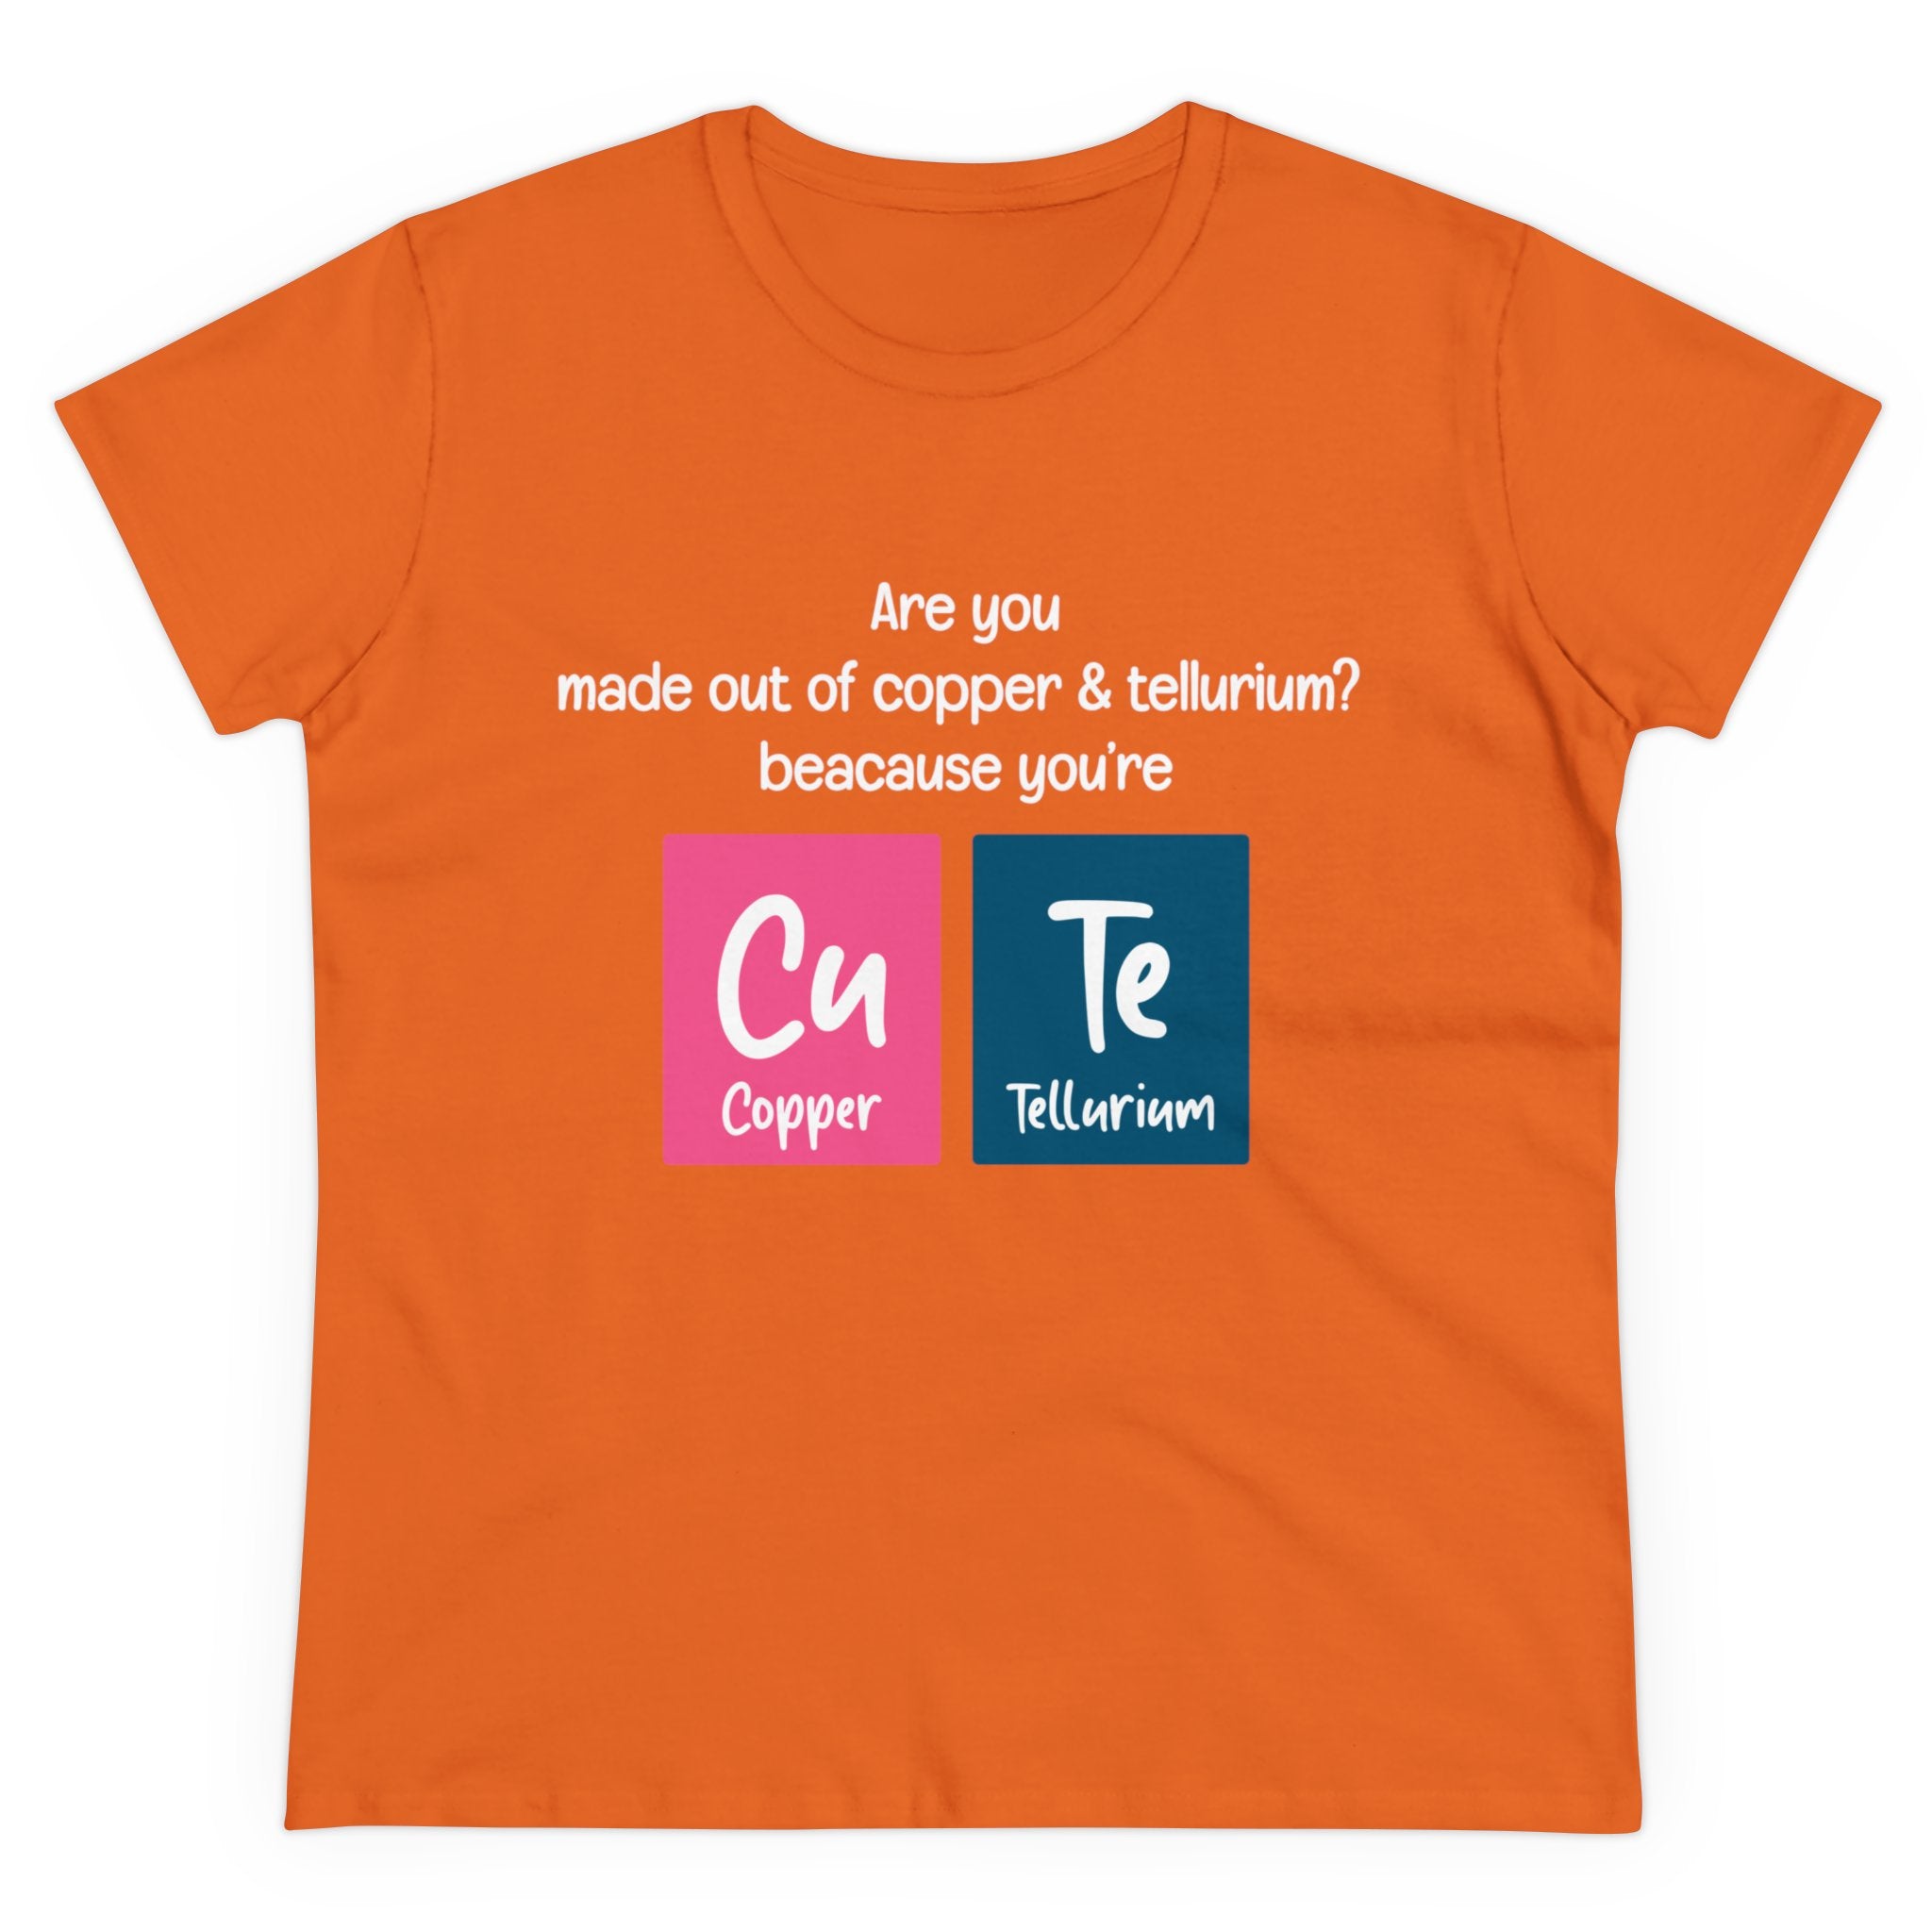 An orange Cu-Te - Women's Tee made from 100% US cotton features a chic design with the text print: "Are you made out of copper & tellurium? Because you're Cu (Copper) and Te (Tellurium).